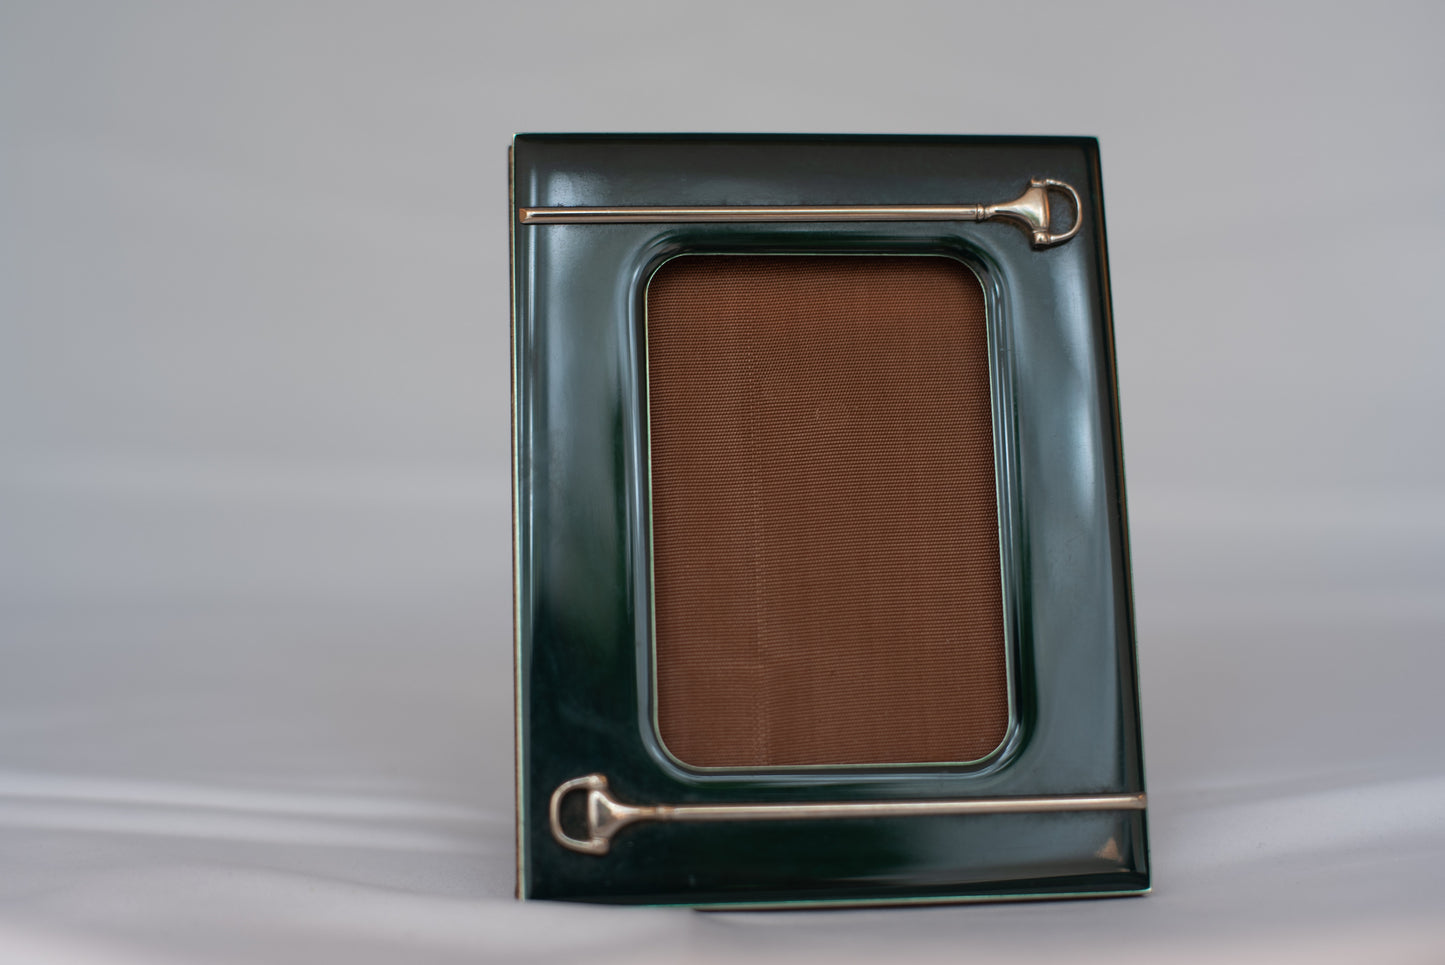 Vintage Gucci Green Lacquer  Picture Frame with Silver Plated Horsebitsi c. 1970 - Glass Measures 2 3/8" x 3 5/8" High